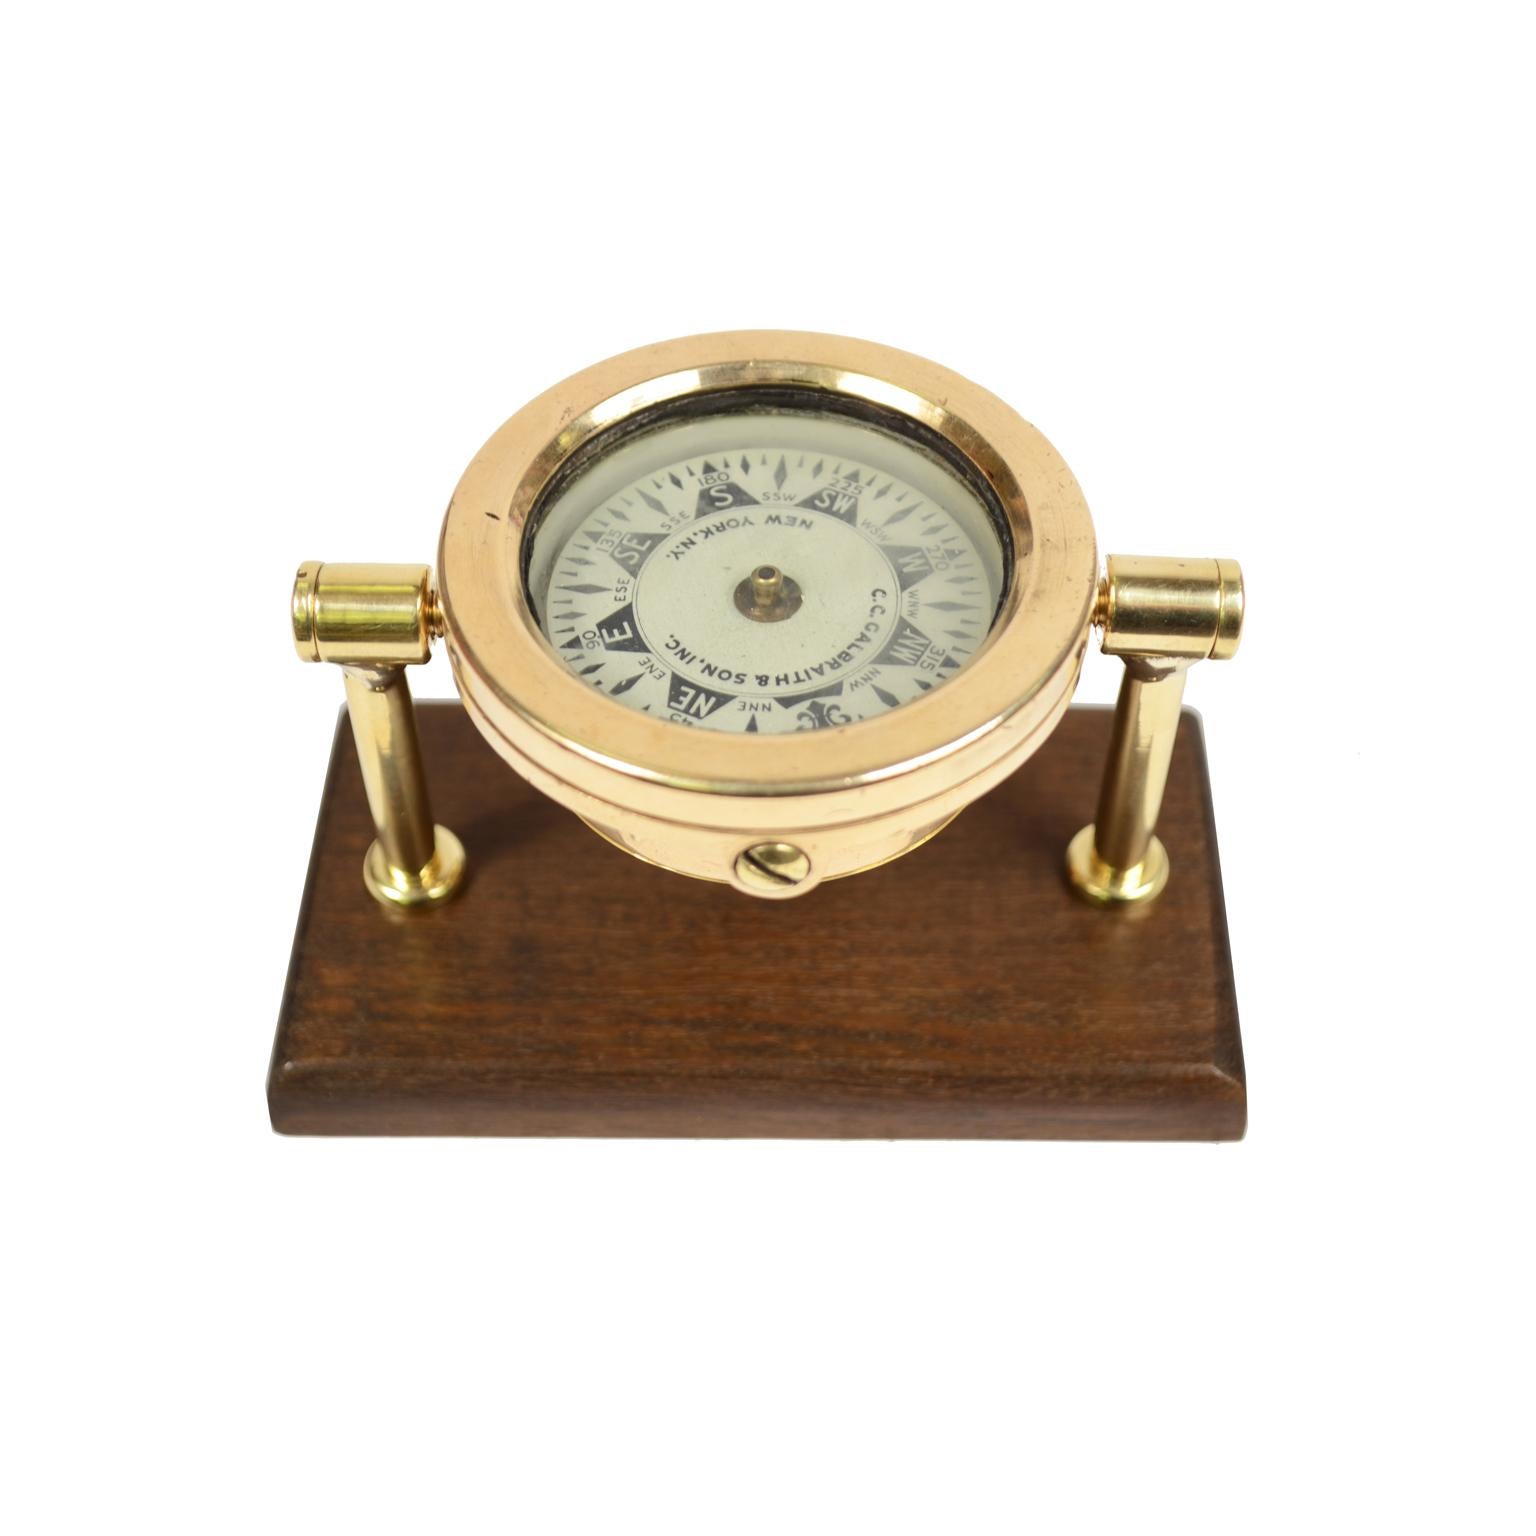 Small liquid compass on universal joint signed C.C. GALBRAITH & SON INC NEW YORK N.Y. from the early 1900s, mounted on a walnut board. The compass consists of a cylindrical box made of brass and bronze, on the bottom of which a hard metal stem is